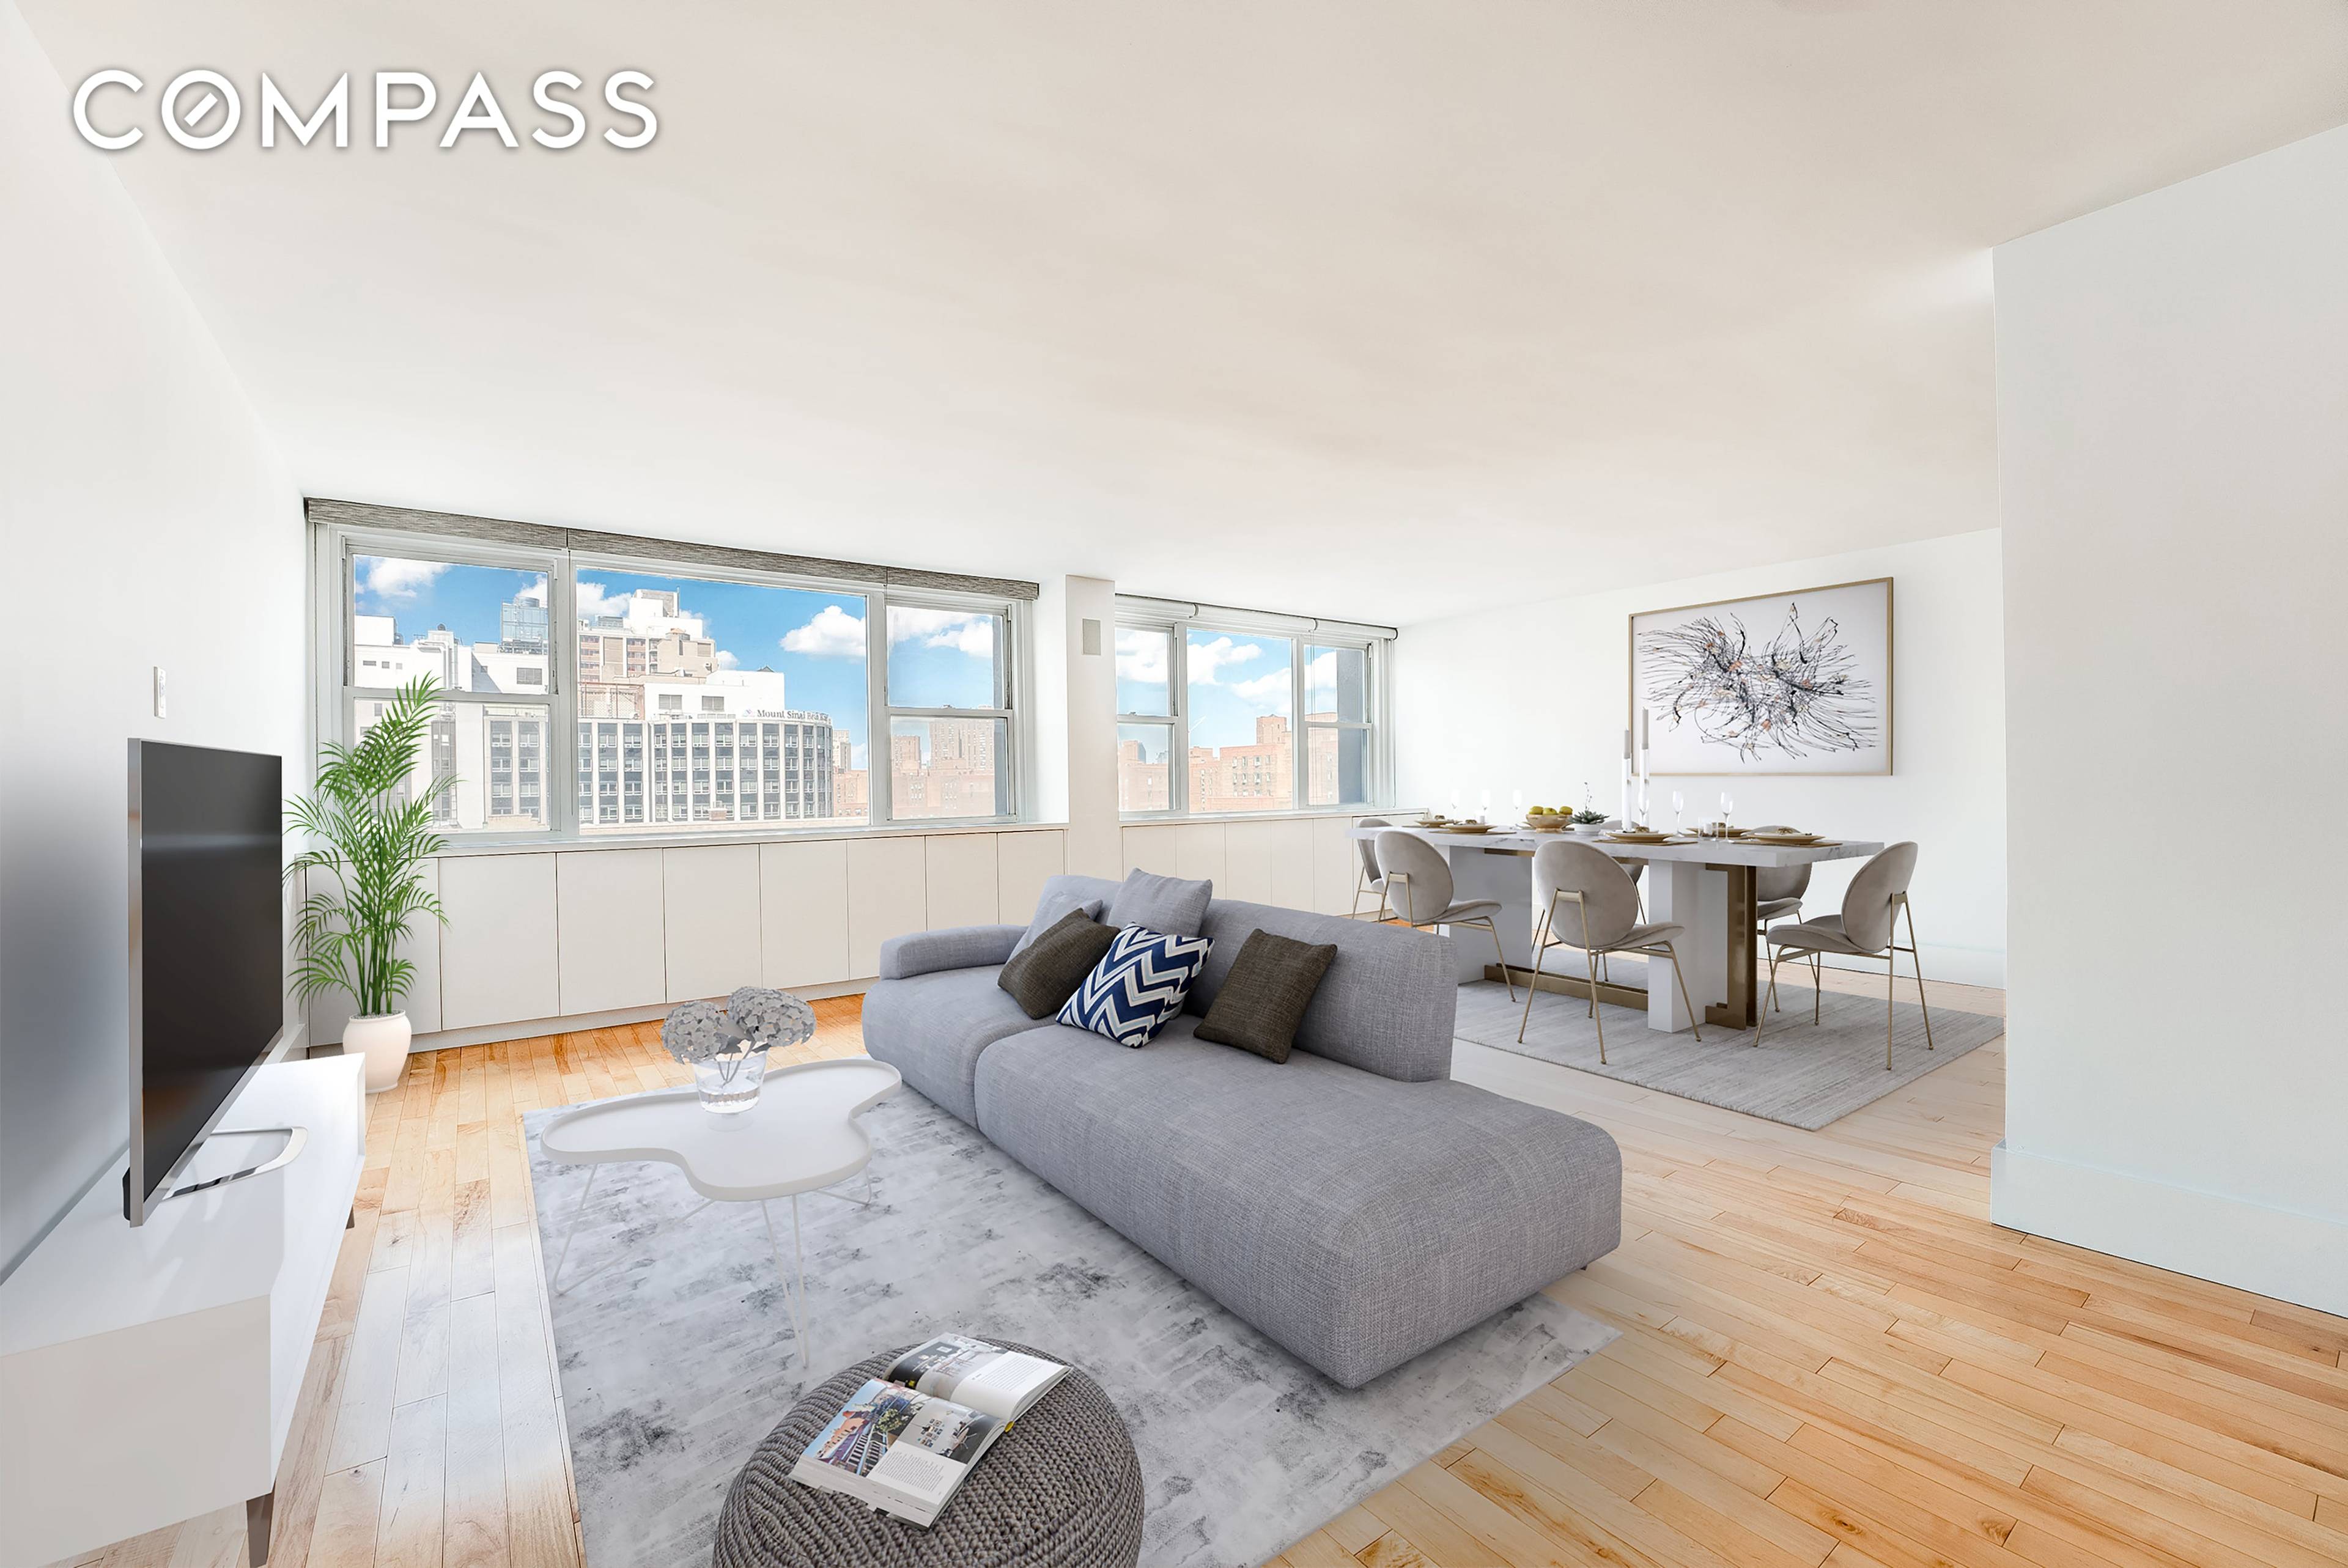 Welcome to 12C 14C, a gorgeous lofty duplex in a sought after, well run co op at the crossroads of coveted Gramercy Park and the vibrant East Village !